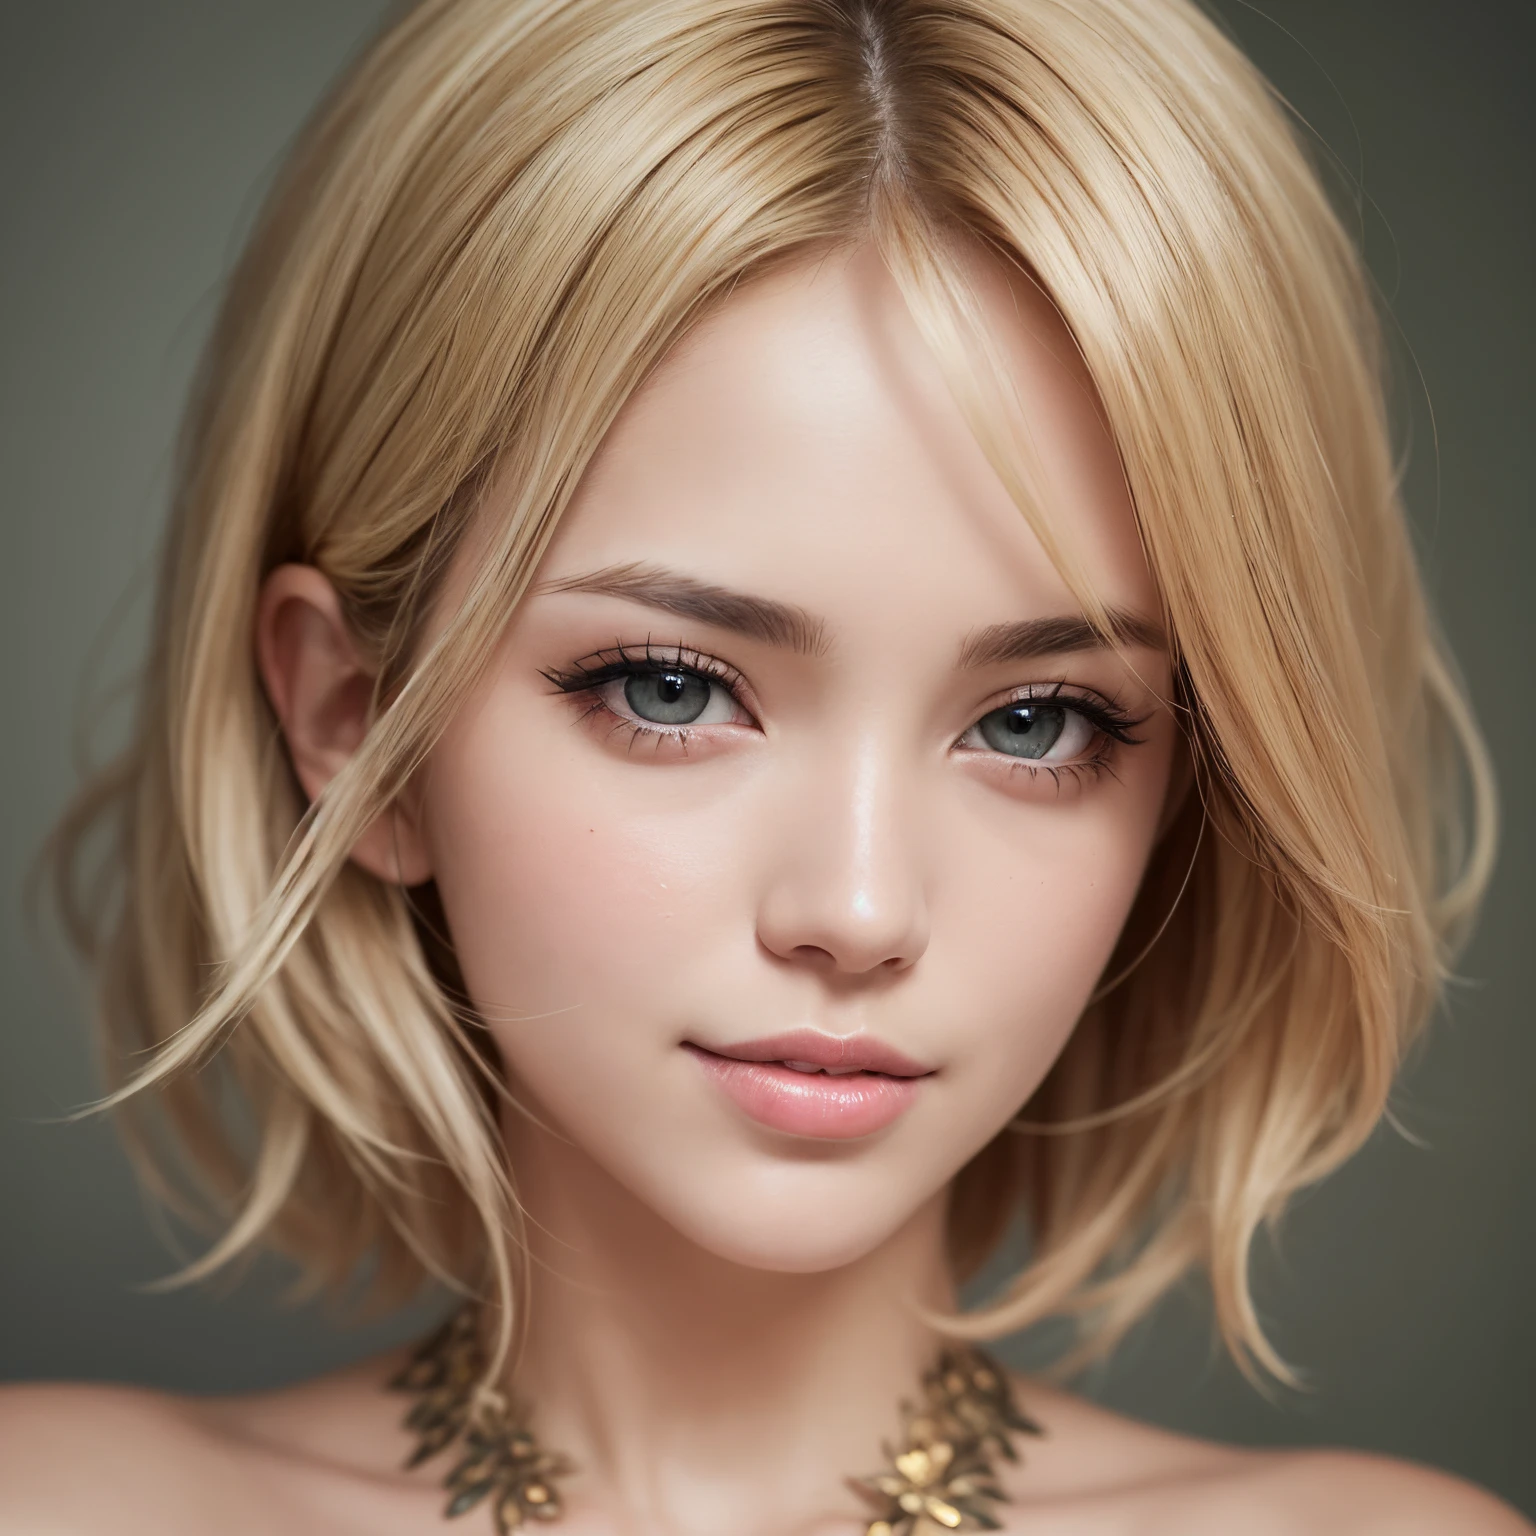 Best-quality, Masterpiece, Ultra-High-Resolution, (Photorealistic:1.4), Raw-Photo, Extremely-Details, Perfect-Anatomy, 1girl, most popular Japanese actress, portrait, grinning, extremely beautiful sexy face, amazingly sexual arousing face, extremely beautiful big black solid circle eyes, extremely beautiful blonde short cut haired, extremely beautiful realistic skins, extremely beautiful lips, extremely beautiful long eyelashes, detailed sexy face, detailed sexual arousing face, detailed eyes, detailed blonde hair, detailed realistic skins, detailed lips, detailed long eyelashes